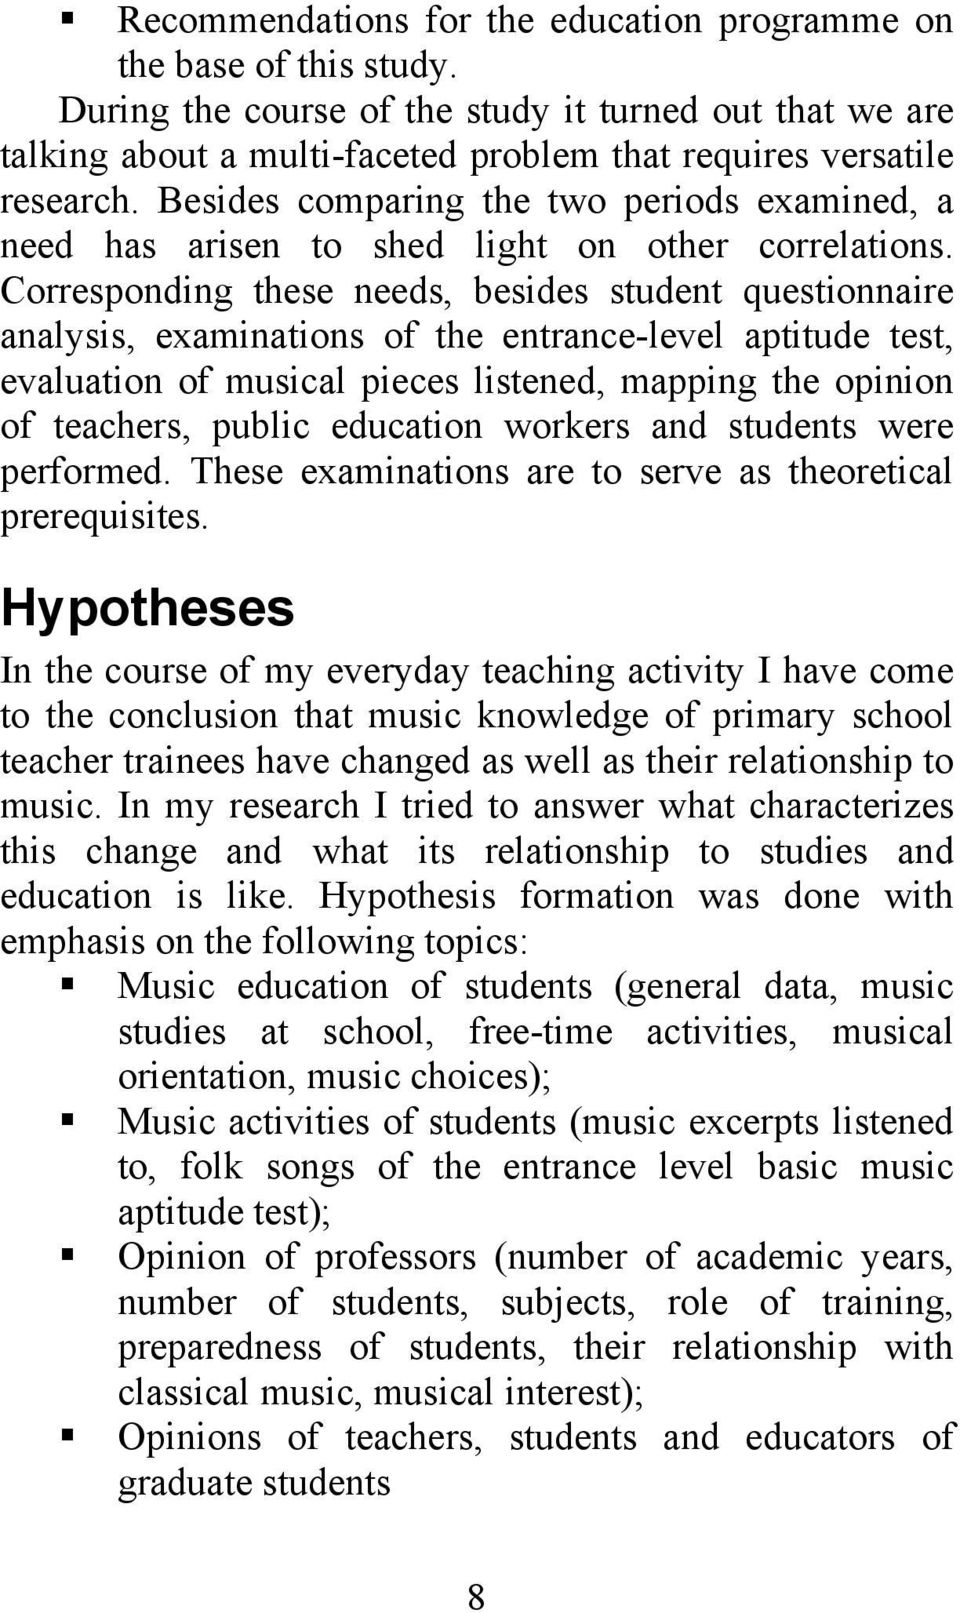 Corresponding these needs, besides student questionnaire analysis, examinations of the entrance-level aptitude test, evaluation of musical pieces listened, mapping the opinion of teachers, public